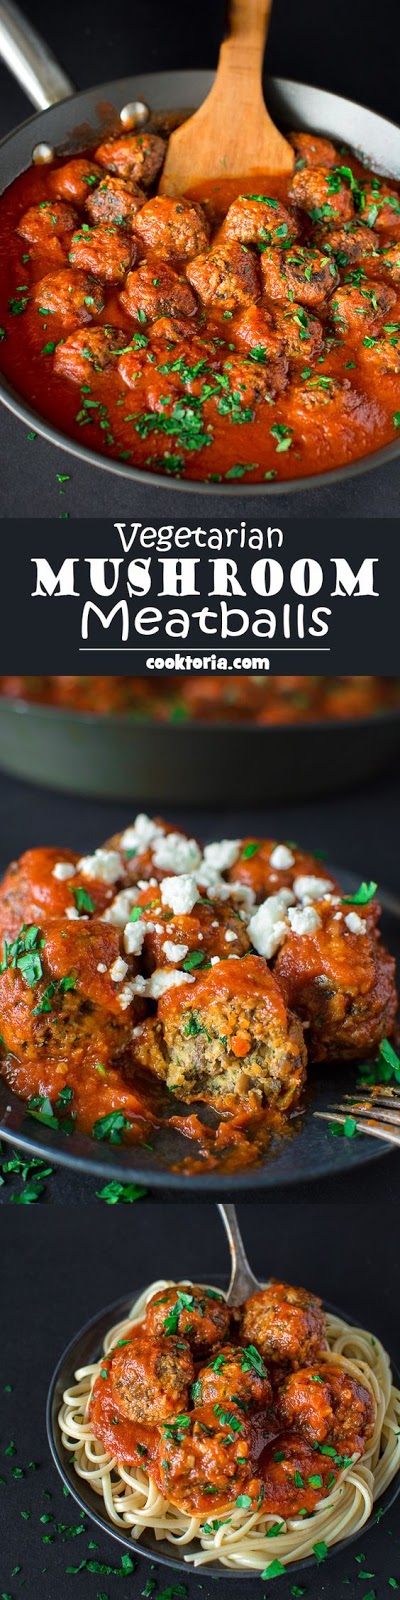 These soft and moist Mushroom Meatballs are simple to prepare and make a perfect vegetarian dinner!